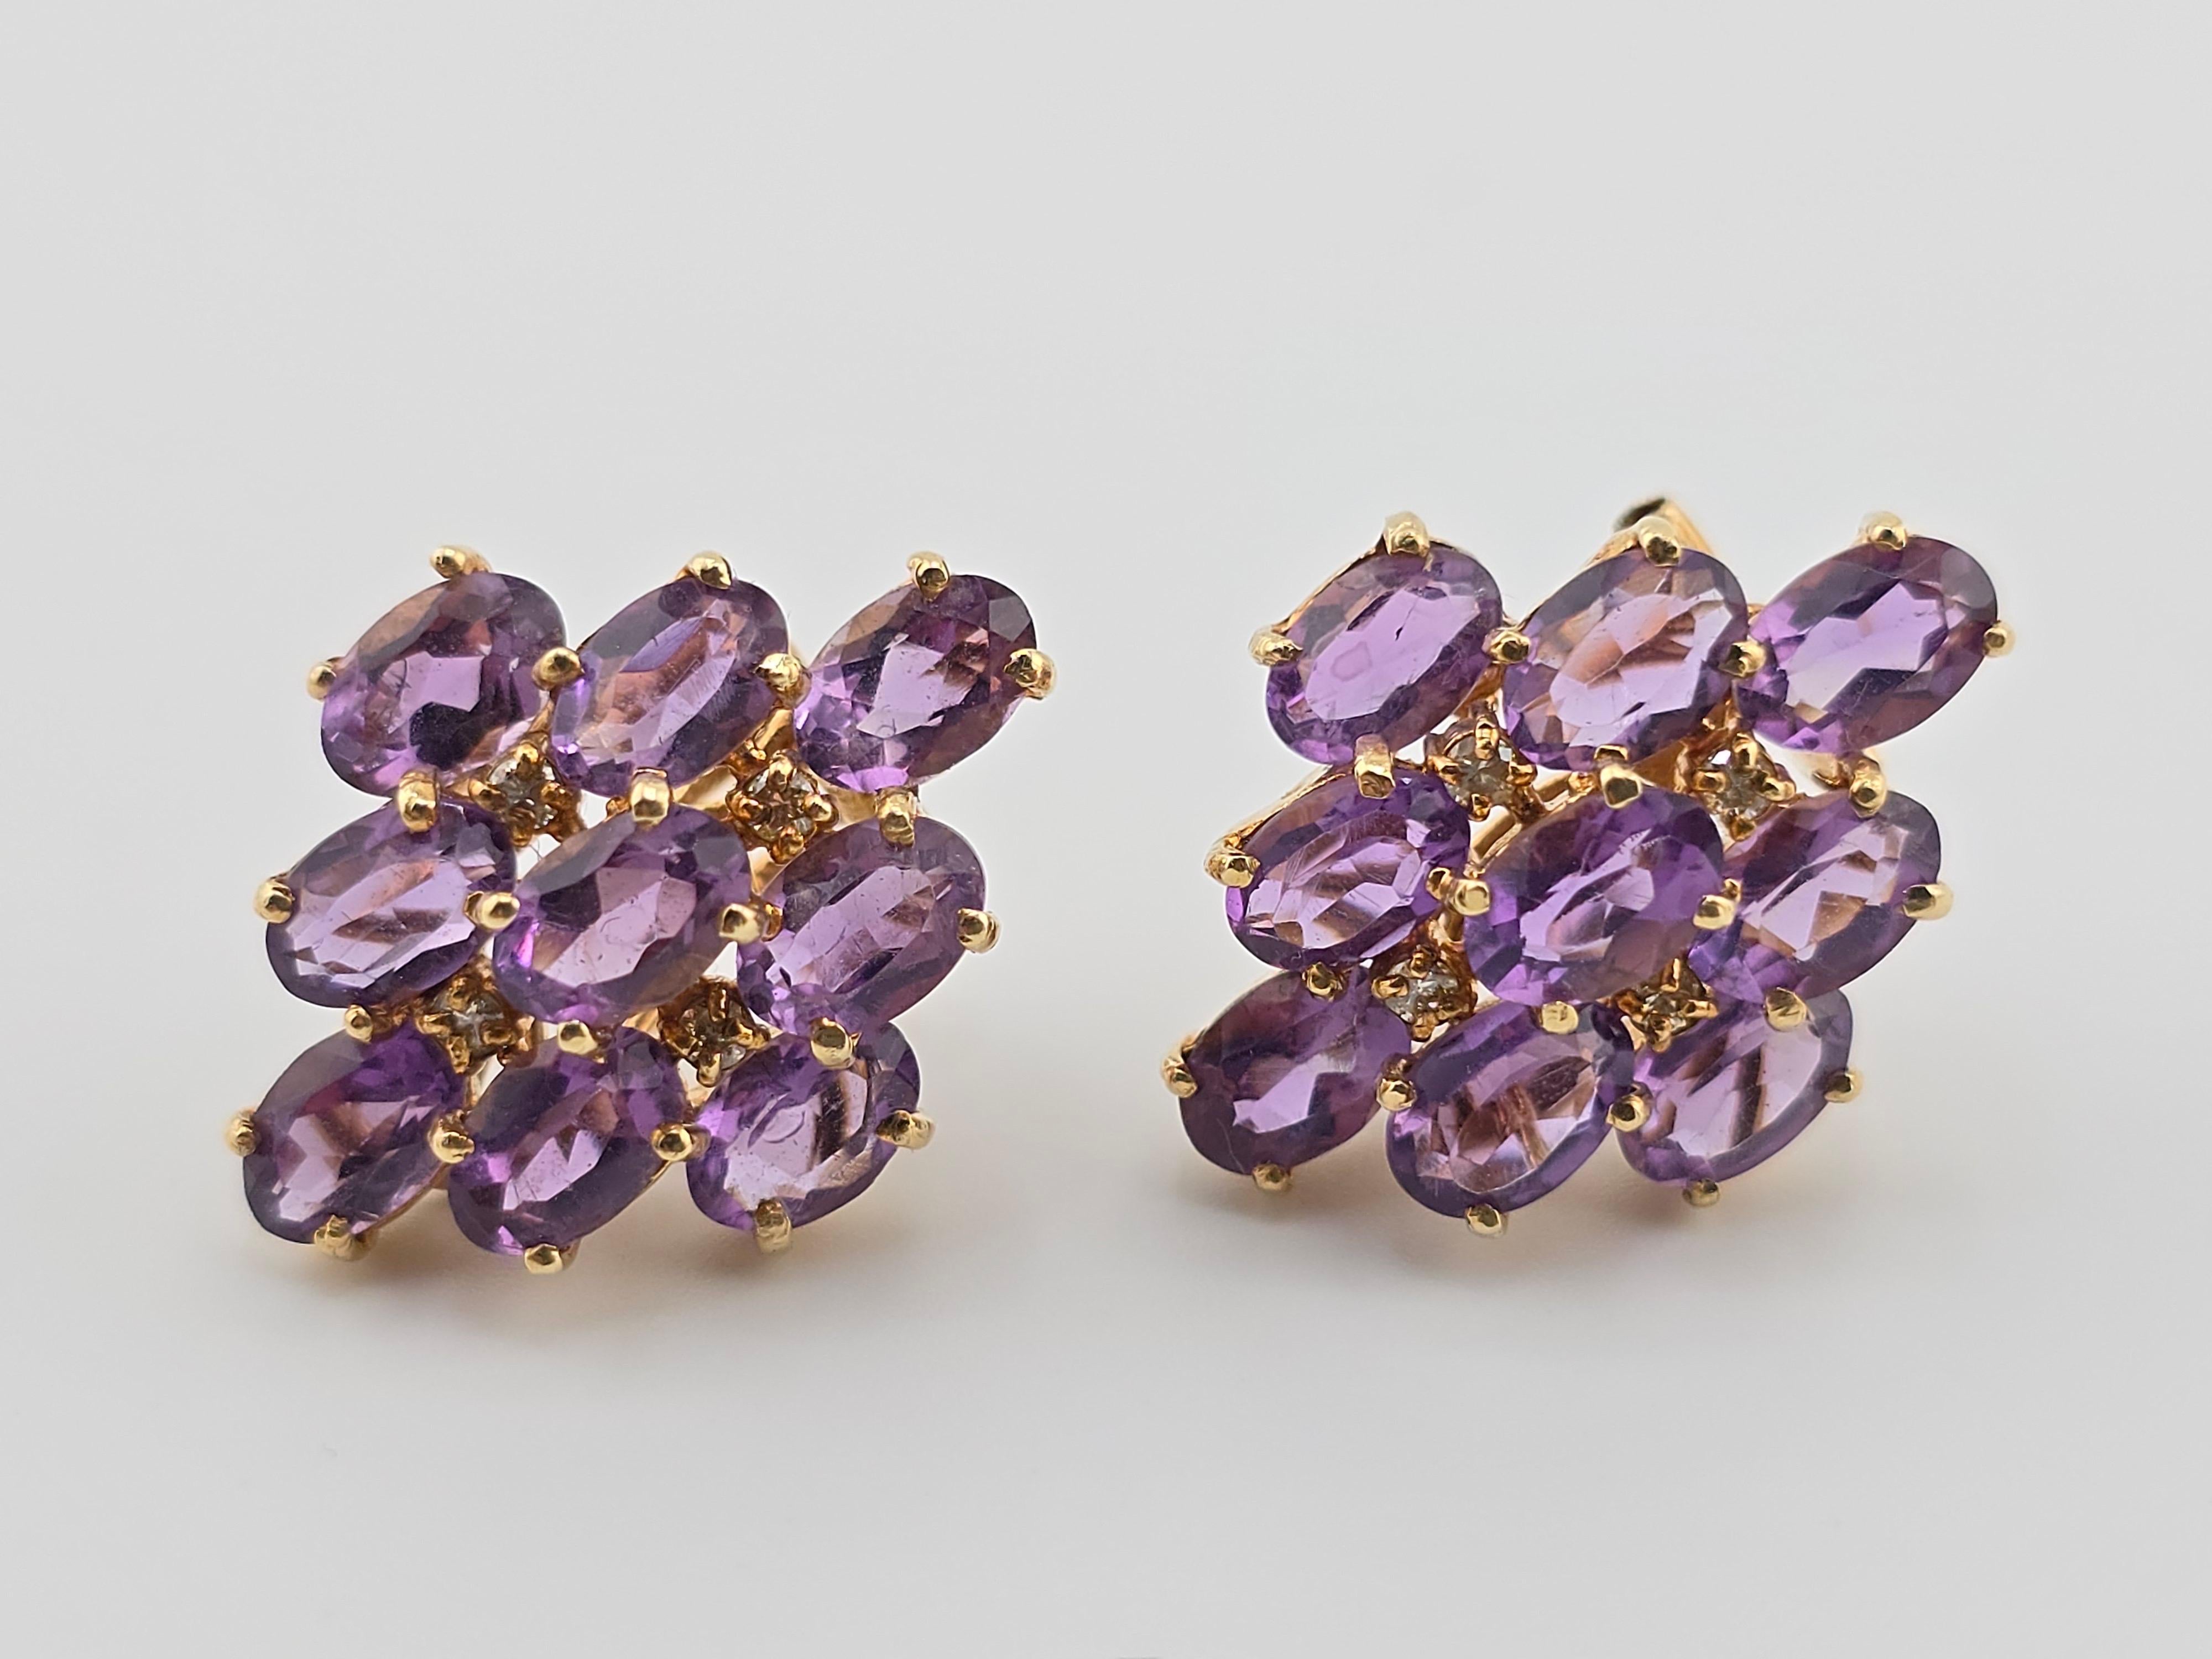 This is a gorgeous pair of amethyst and 14 karat yellow gold earrings. The total weight of the amethyst is approximately 4 carats each earring. The condition is very good and it is ready to go. They are truly well-made fantastically. There is also